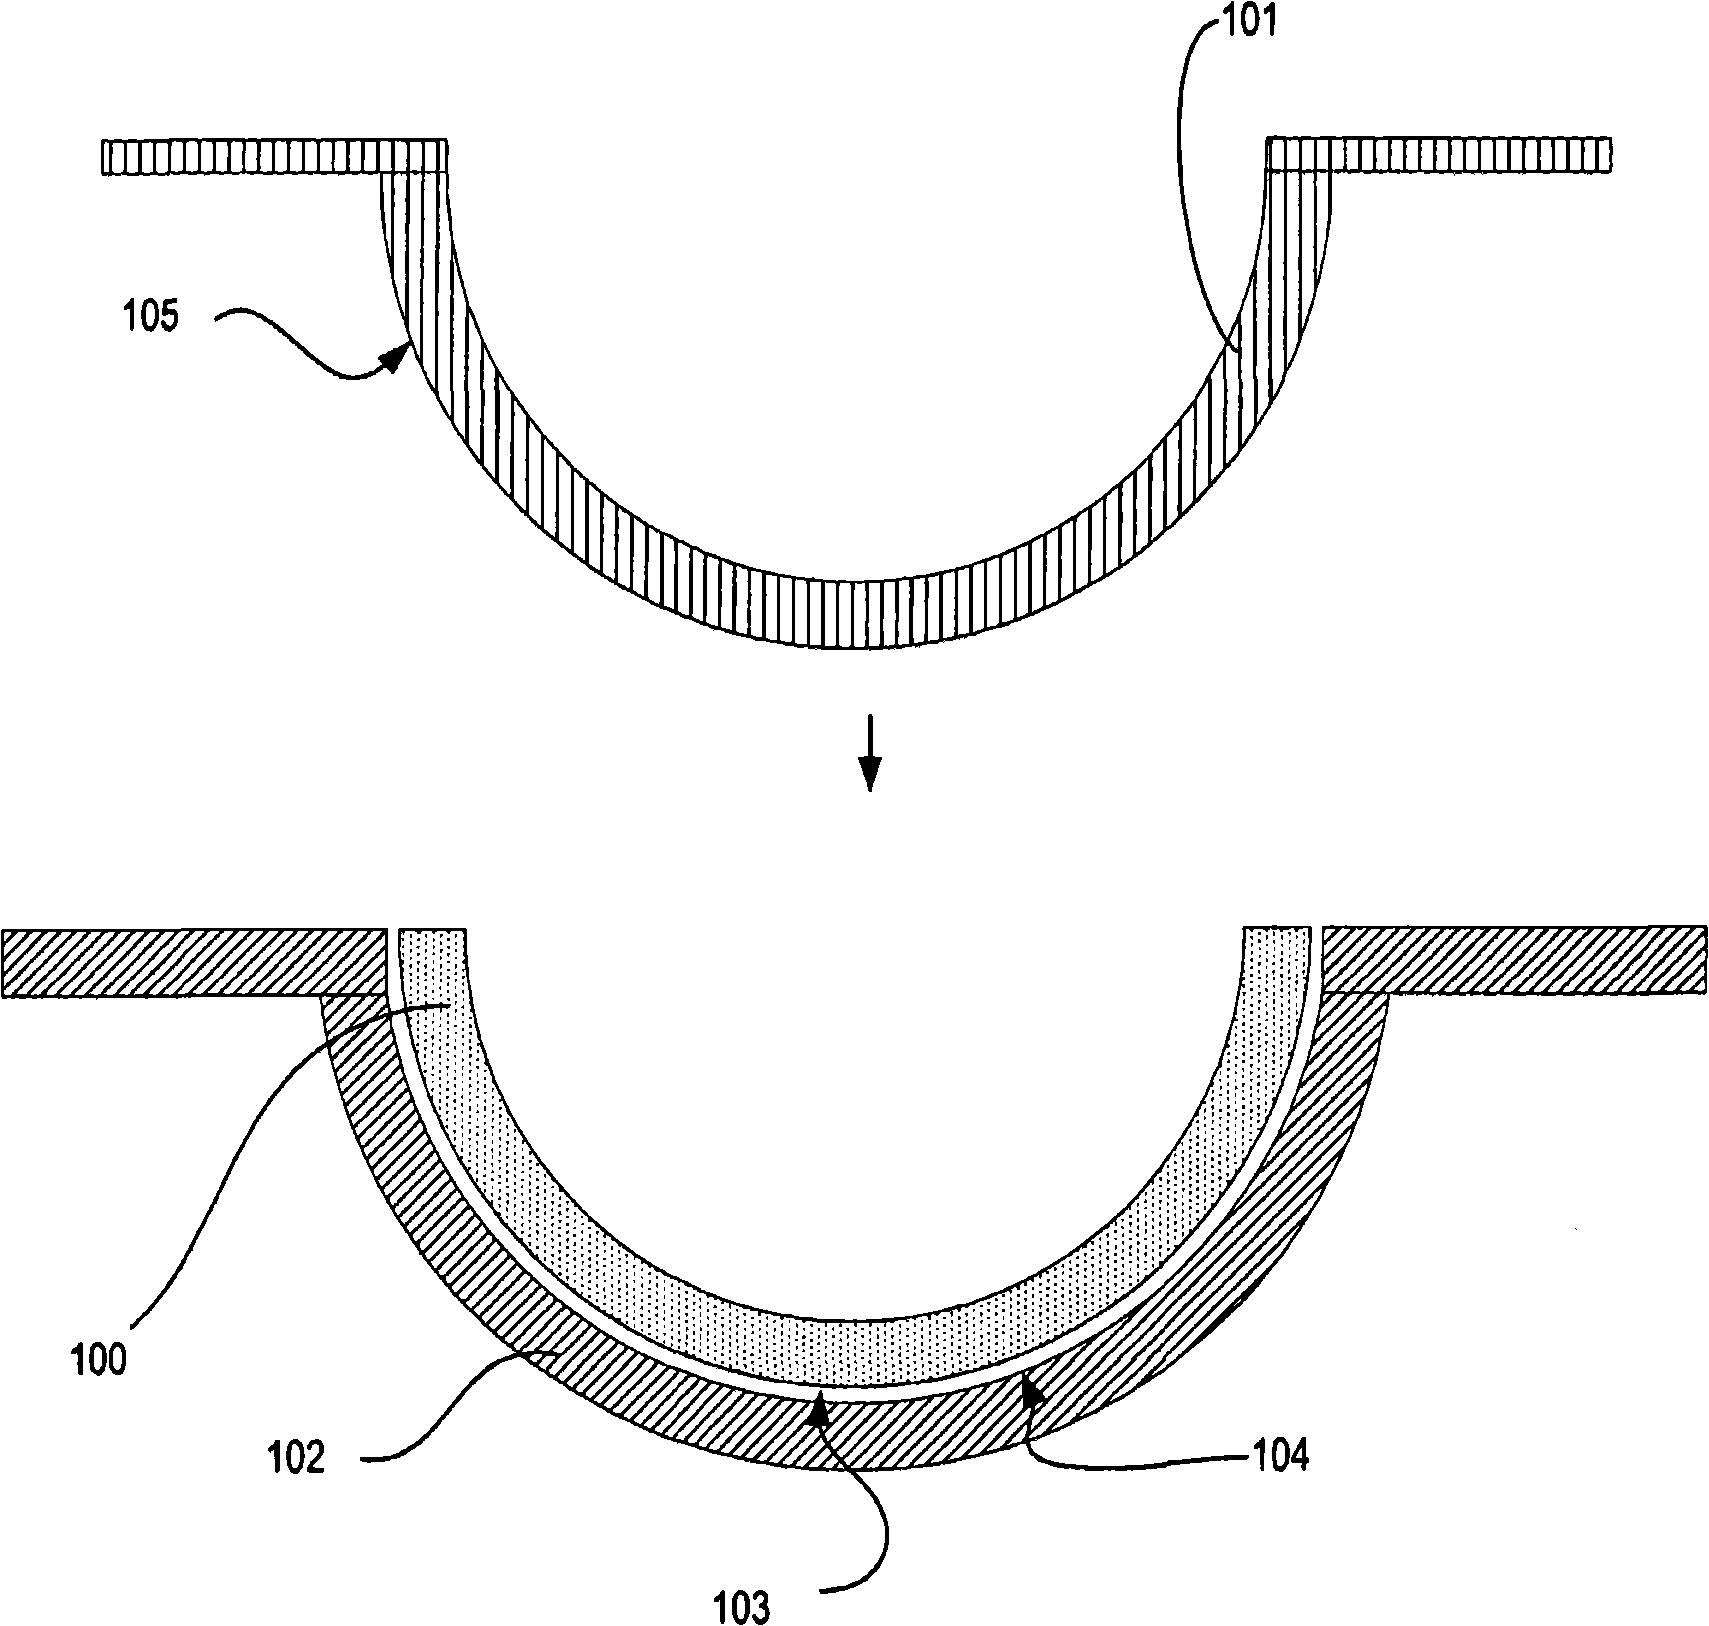 Process for forming clear, wettable silicone hydrogel articles